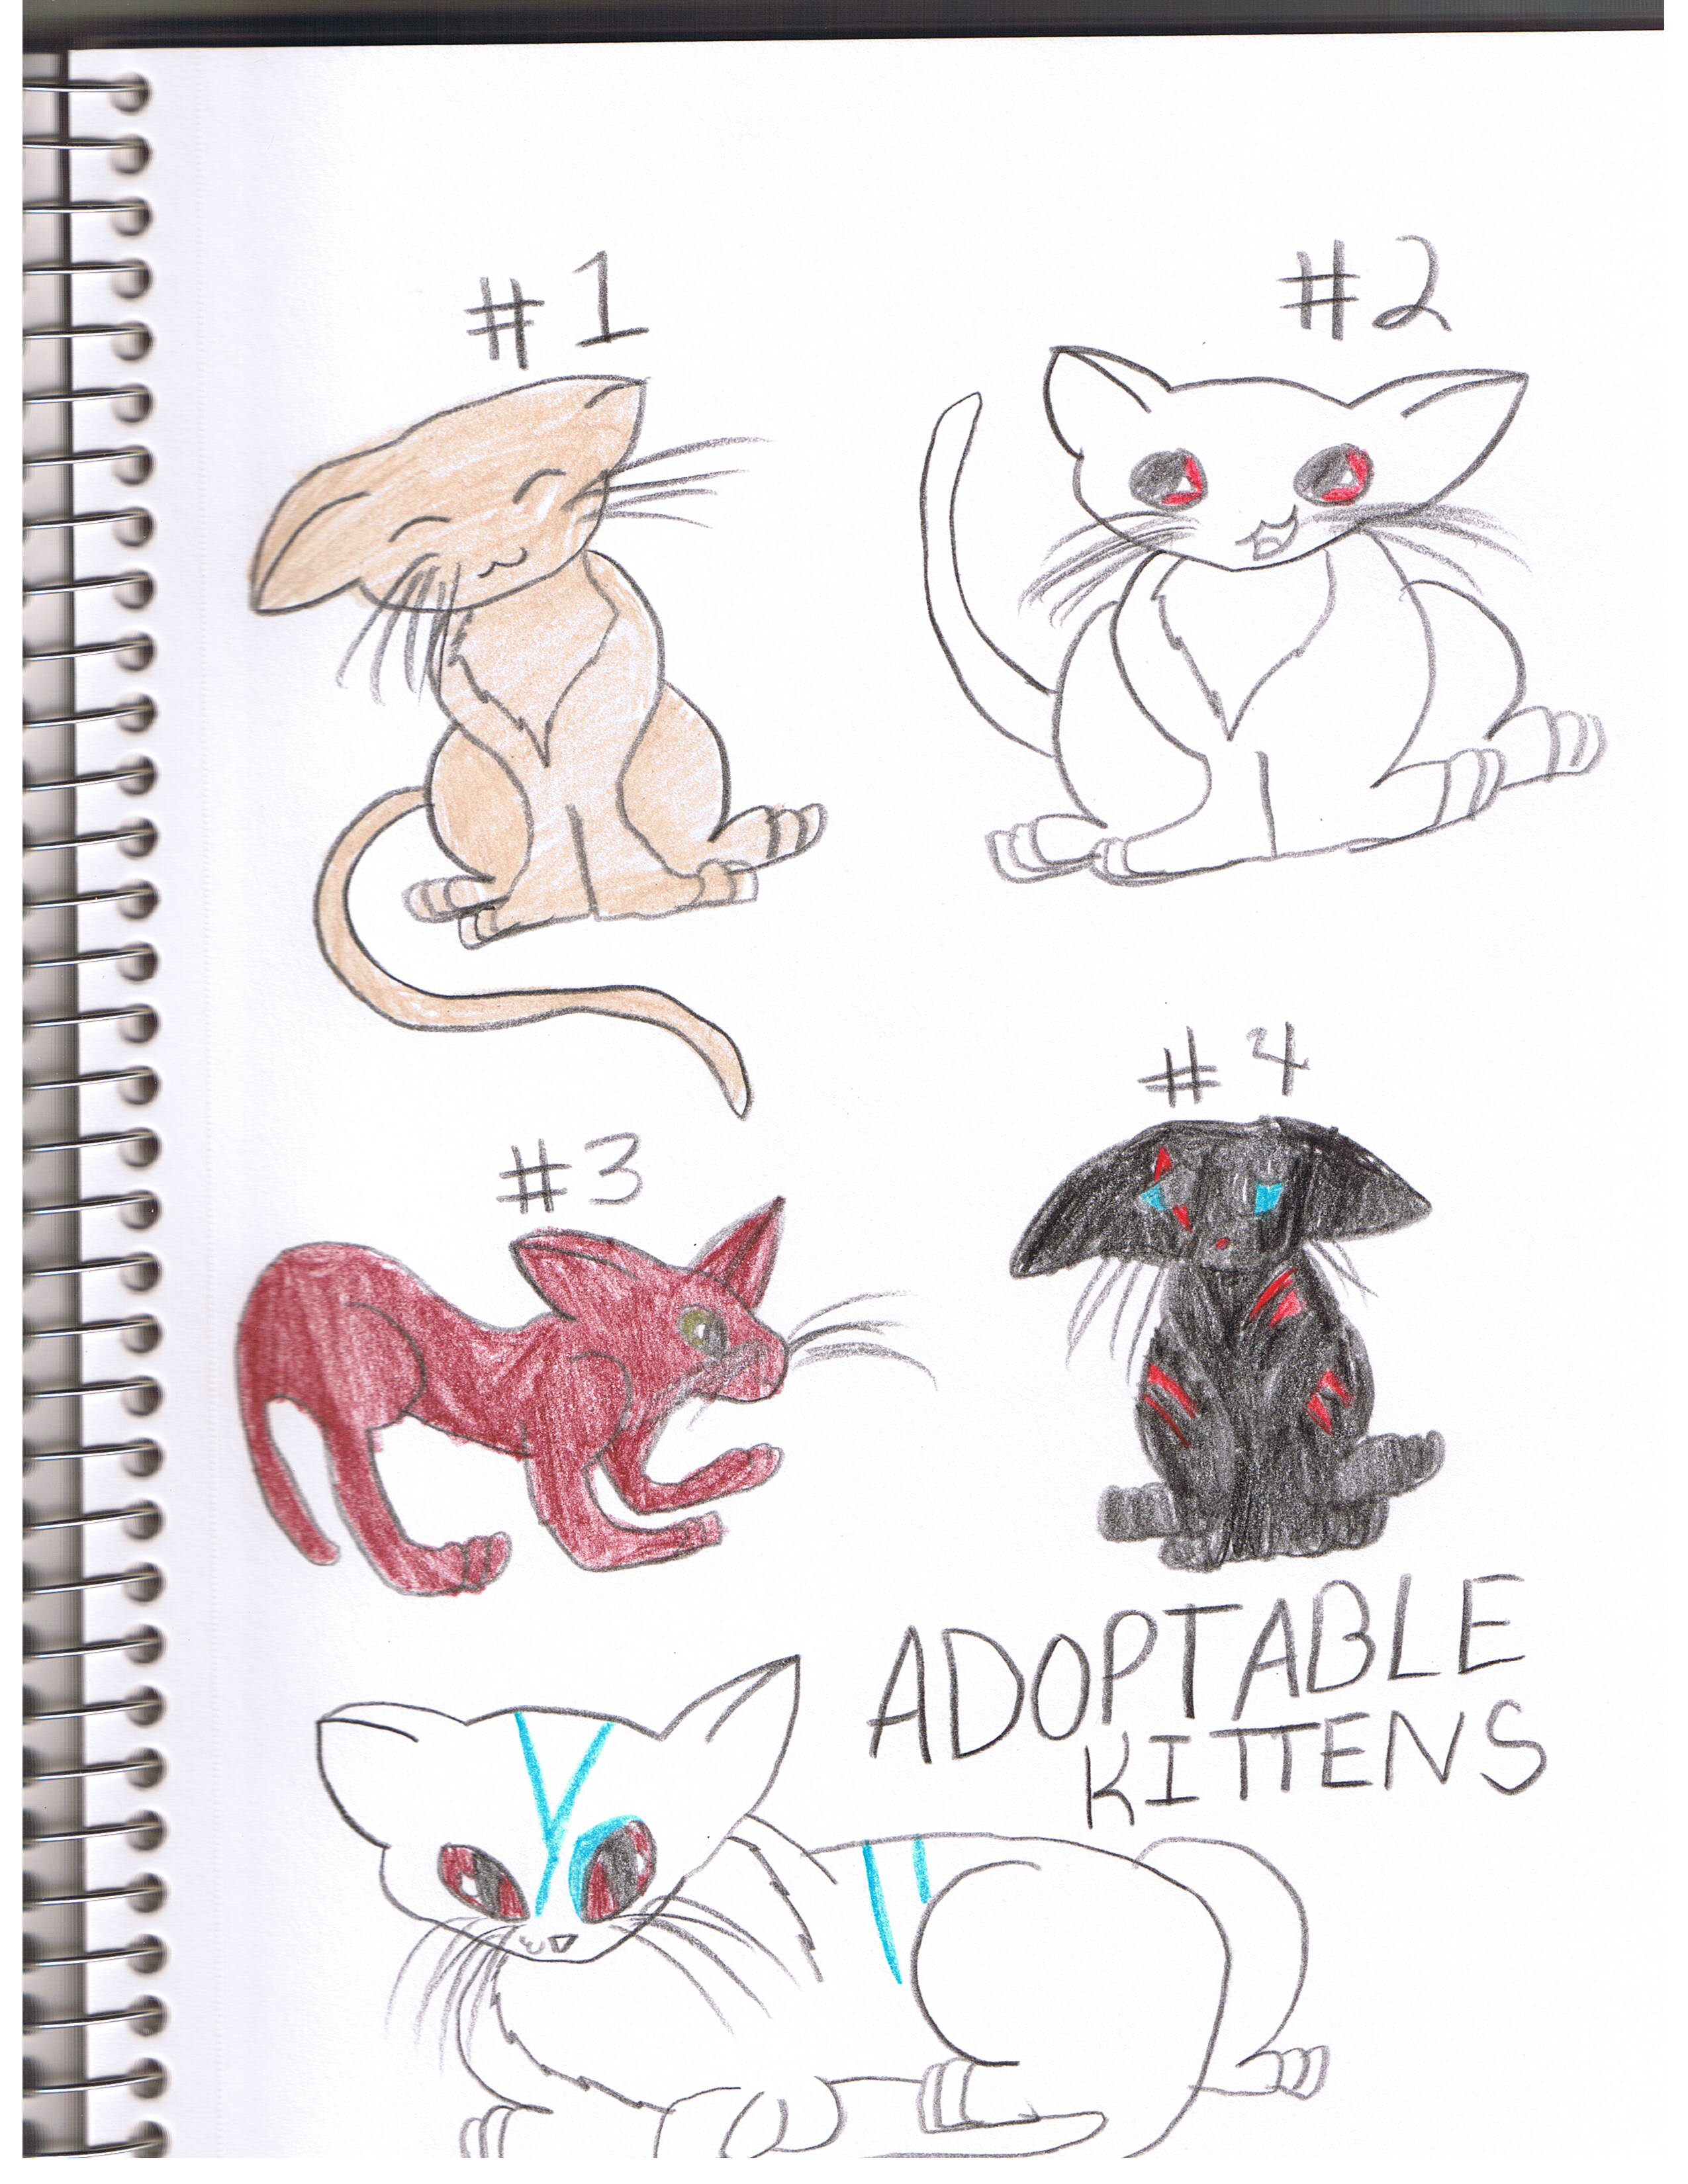 Adoptable KITTENS! by Iceshadow